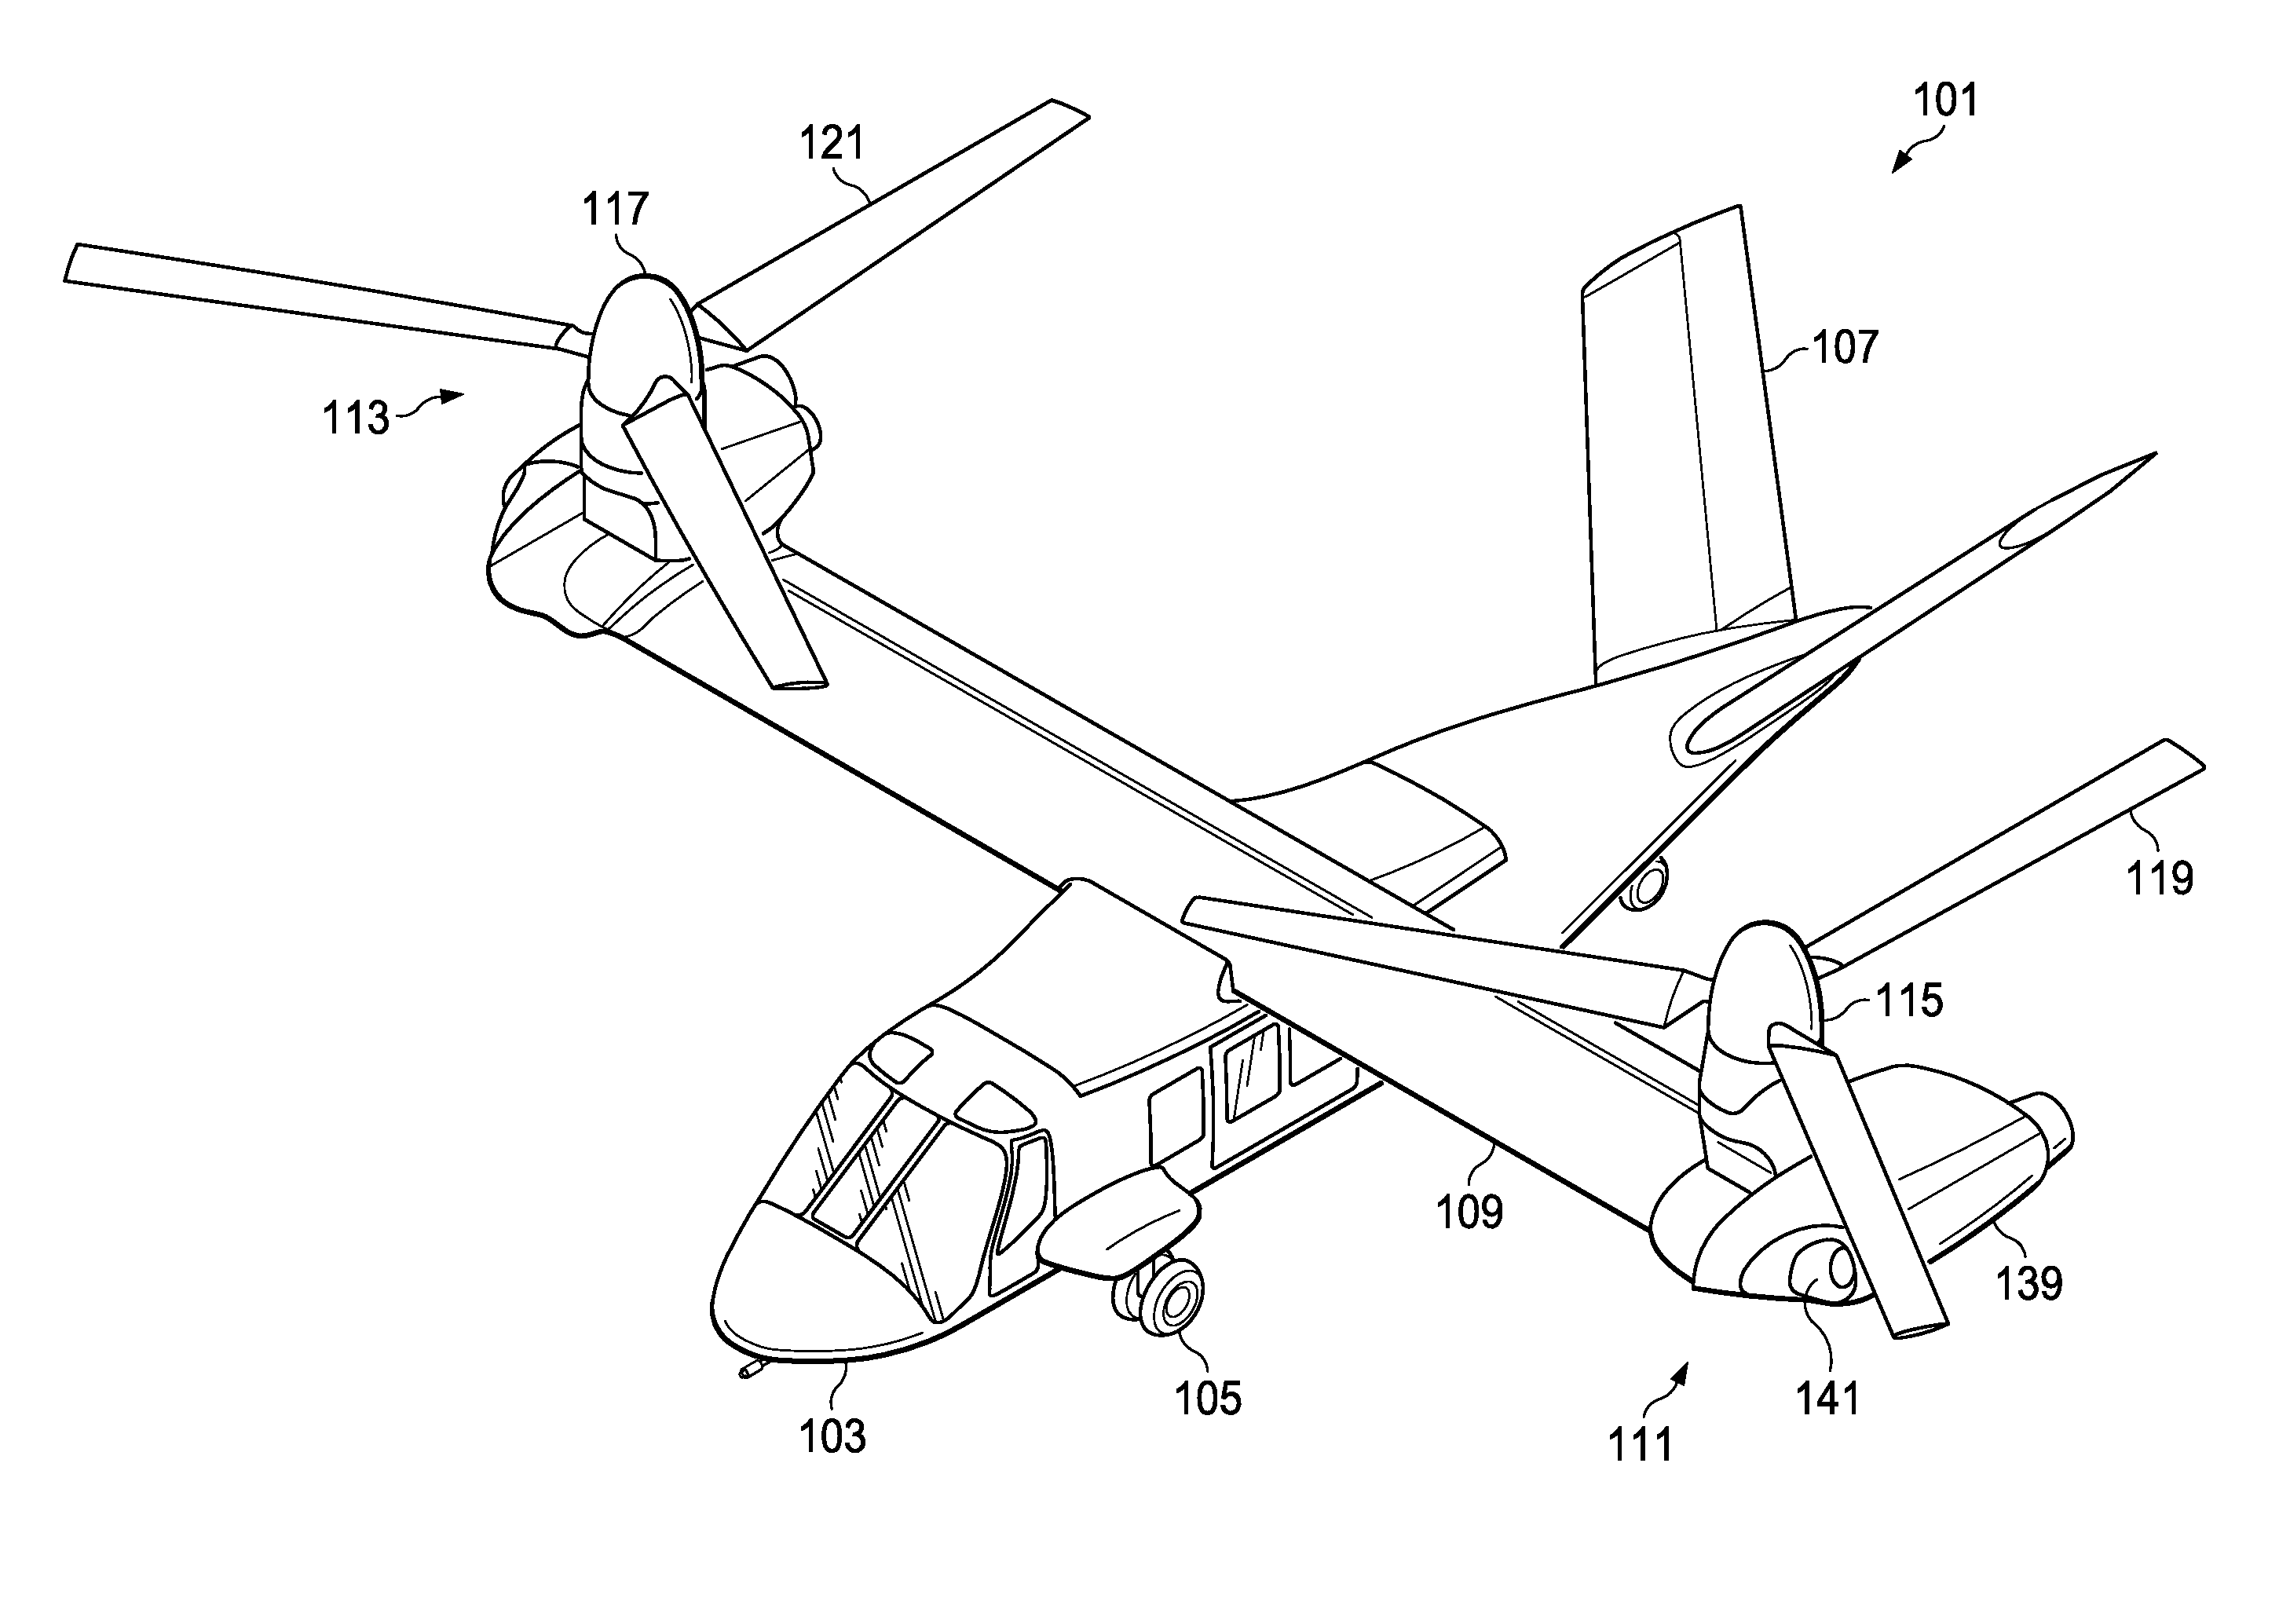 Fixed engine and rotating proprotor arrangement for a tiltrotor aircraft